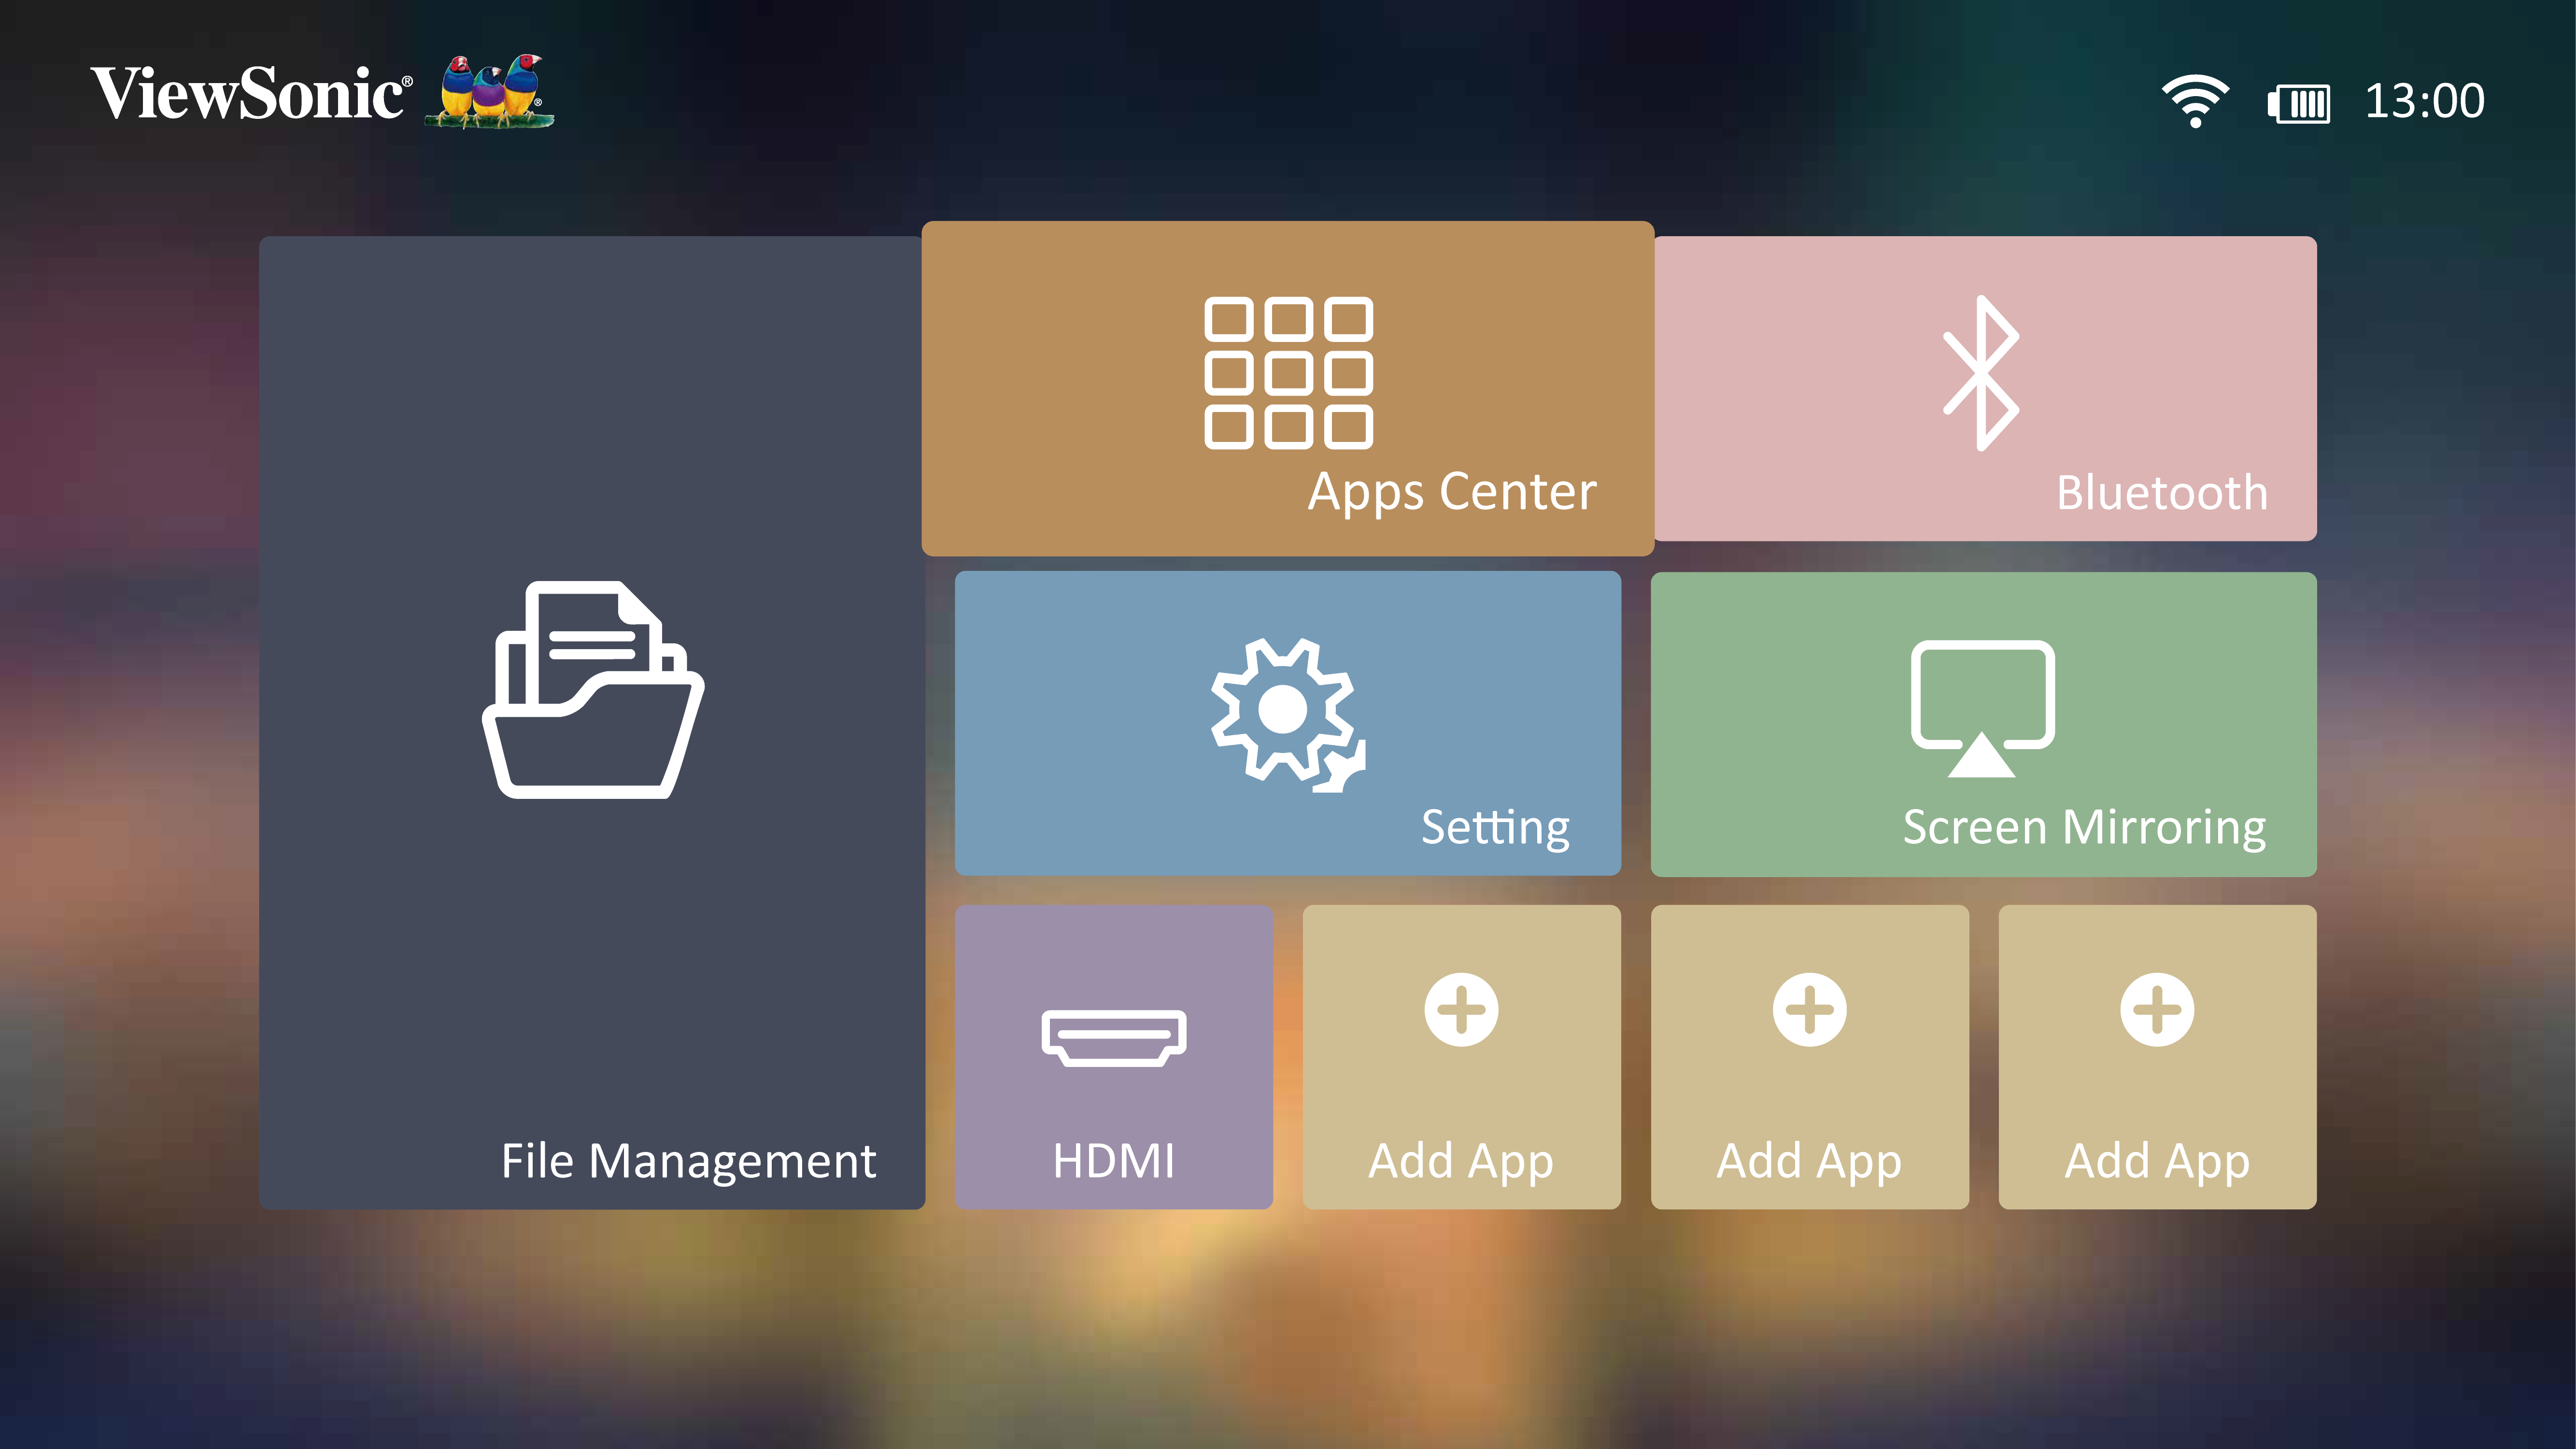 Step 1 - Select Apps Center